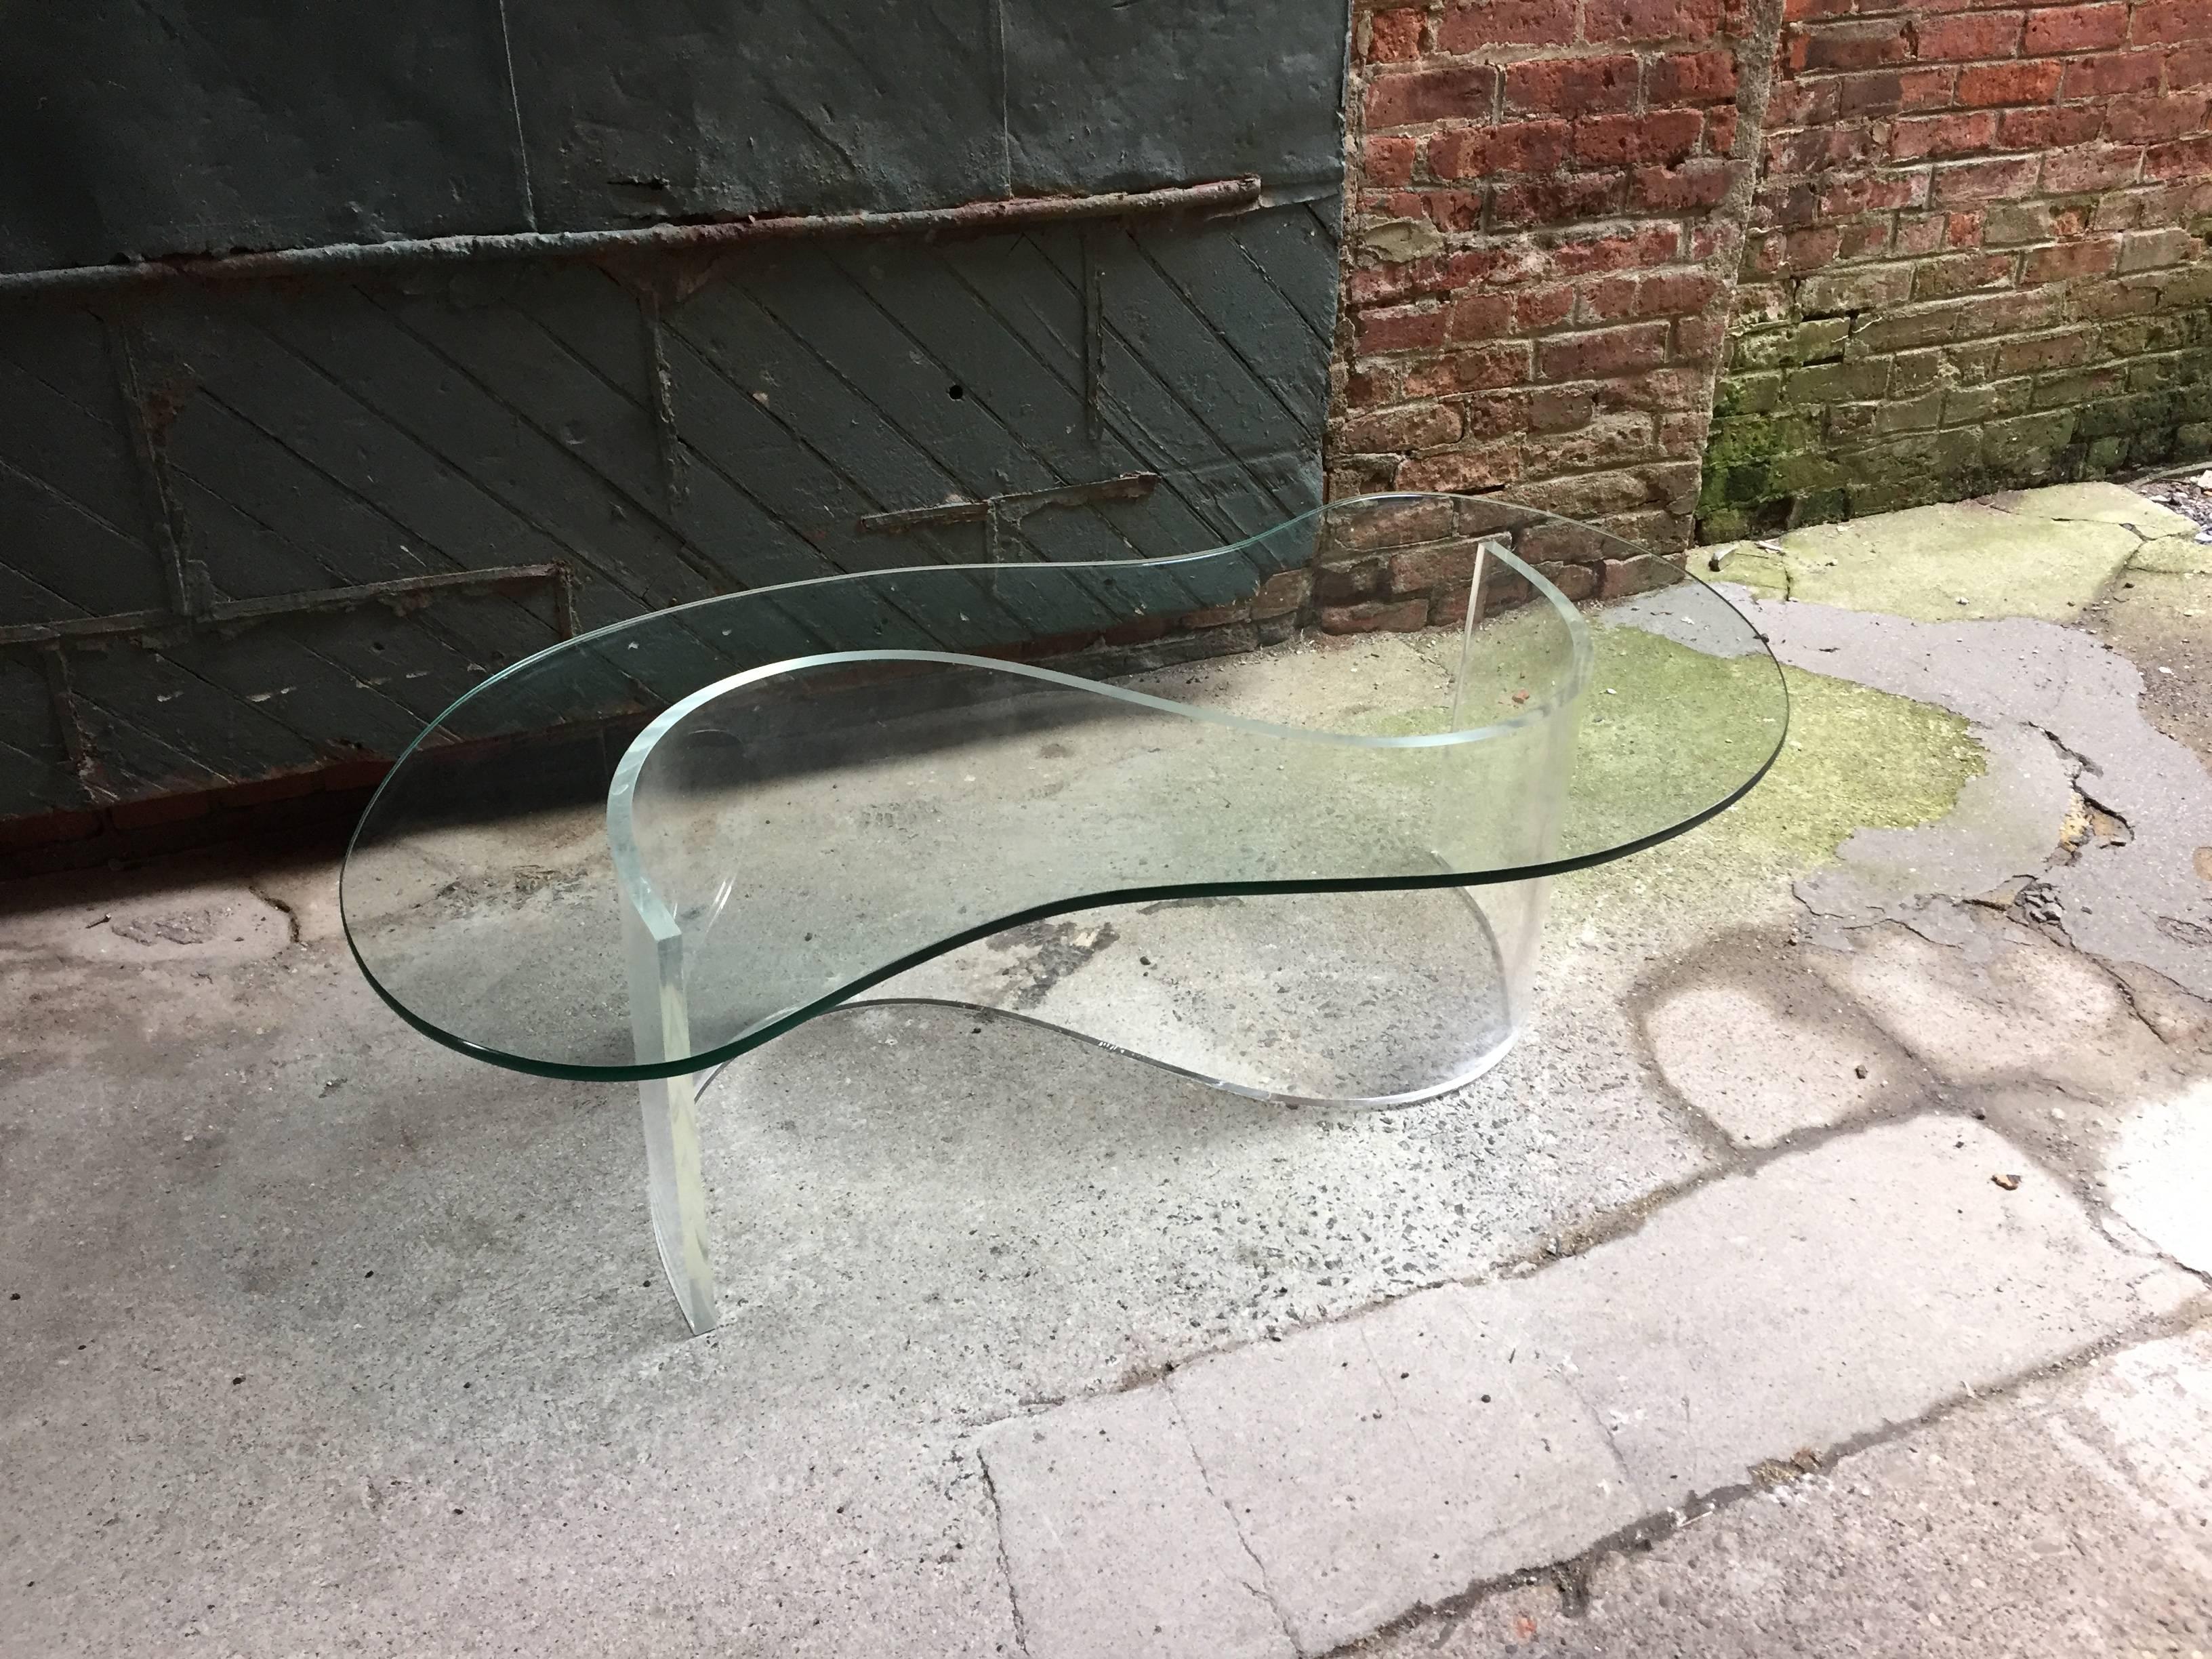 Free-form glass top on S shaped acrylic/Lucite base, circa 1970. Glass top measures 49" x 27.5" x .5" high.